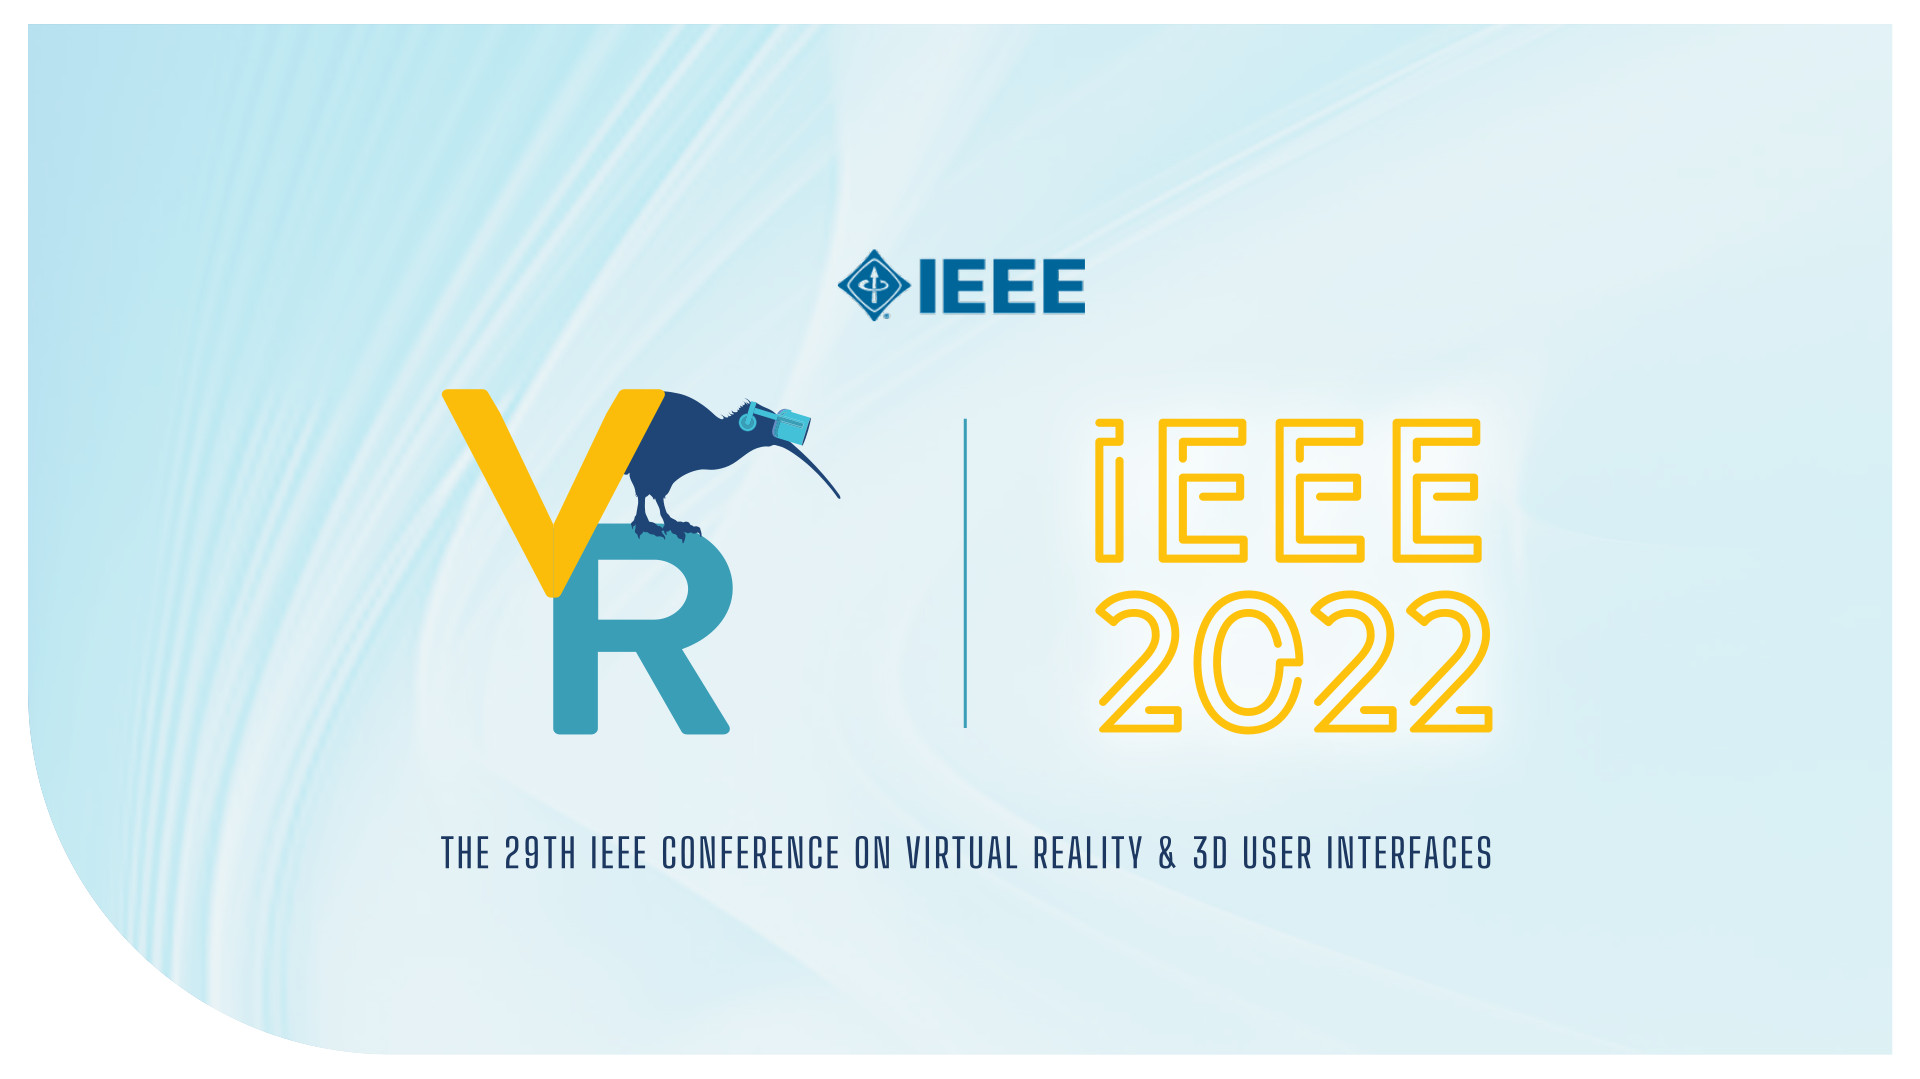 The IEEE VR 2022 logo with an abstract blue swirled background. VR is written with a kiwi wearing a VR headset standing on top of the R.